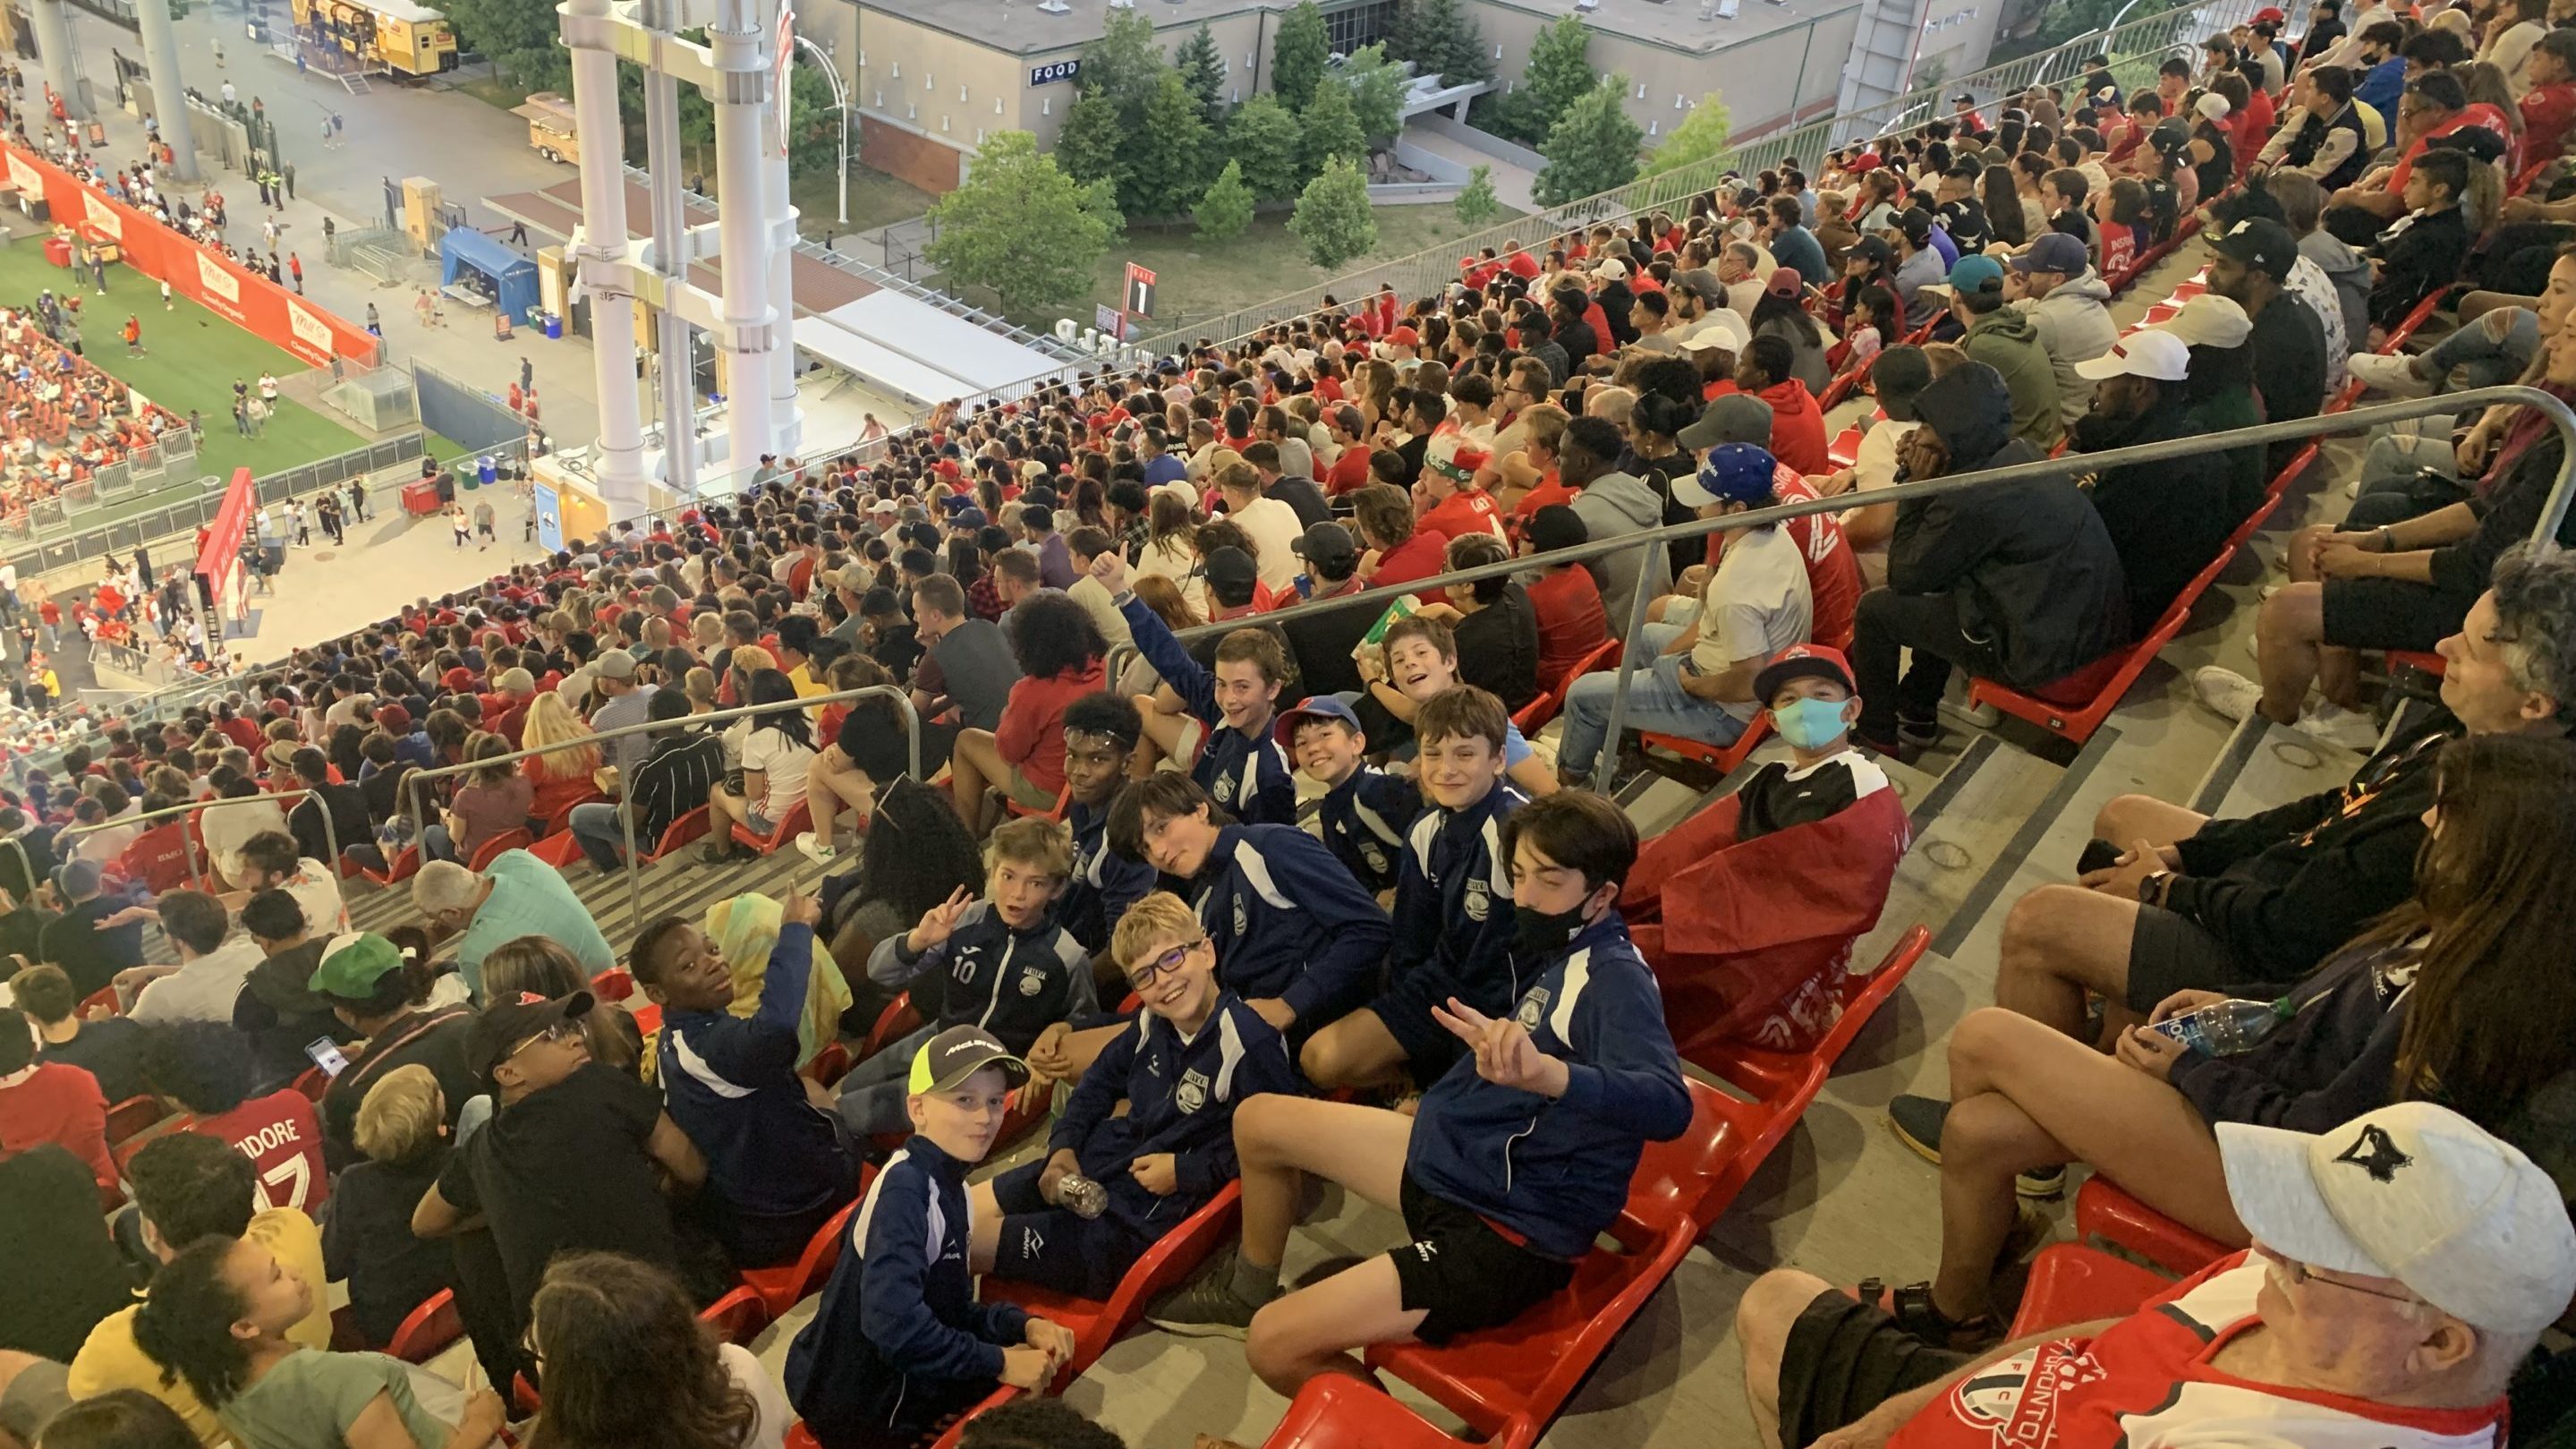 Kingston United Soccer Club attends match between Toronto FC and San